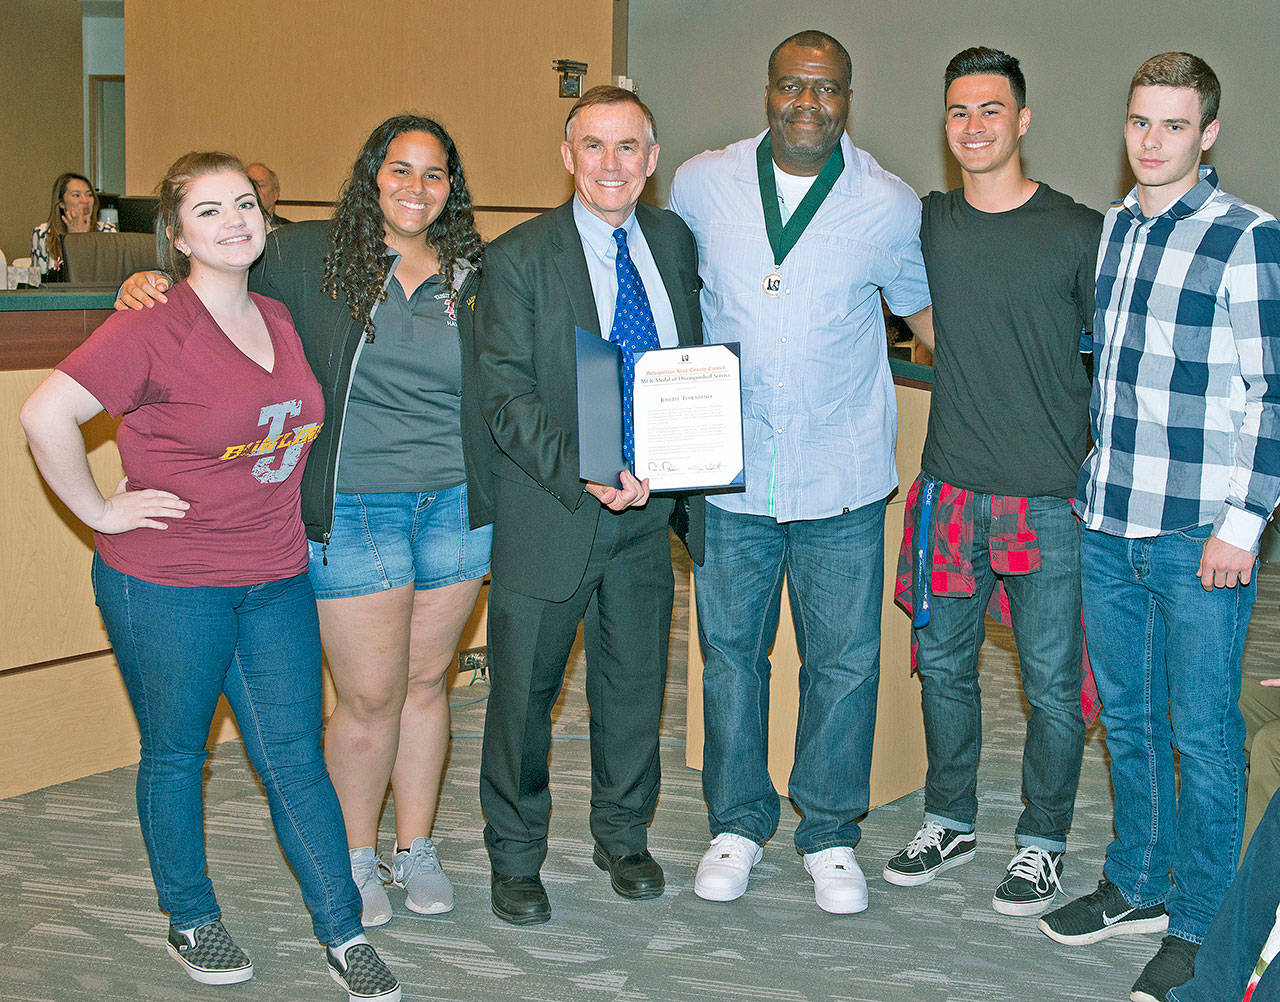 At the presentation are, from left: Thomas Jefferson students Cassie Lee and Haylee Pollard; King County Councilmember Pete von Reichbauer; Jefferson coach and MLK Medal recipient Joseph Townsend; and students Mason DeLaCruz and Avery Cantino-Kennedy. COURTESY PHOTO